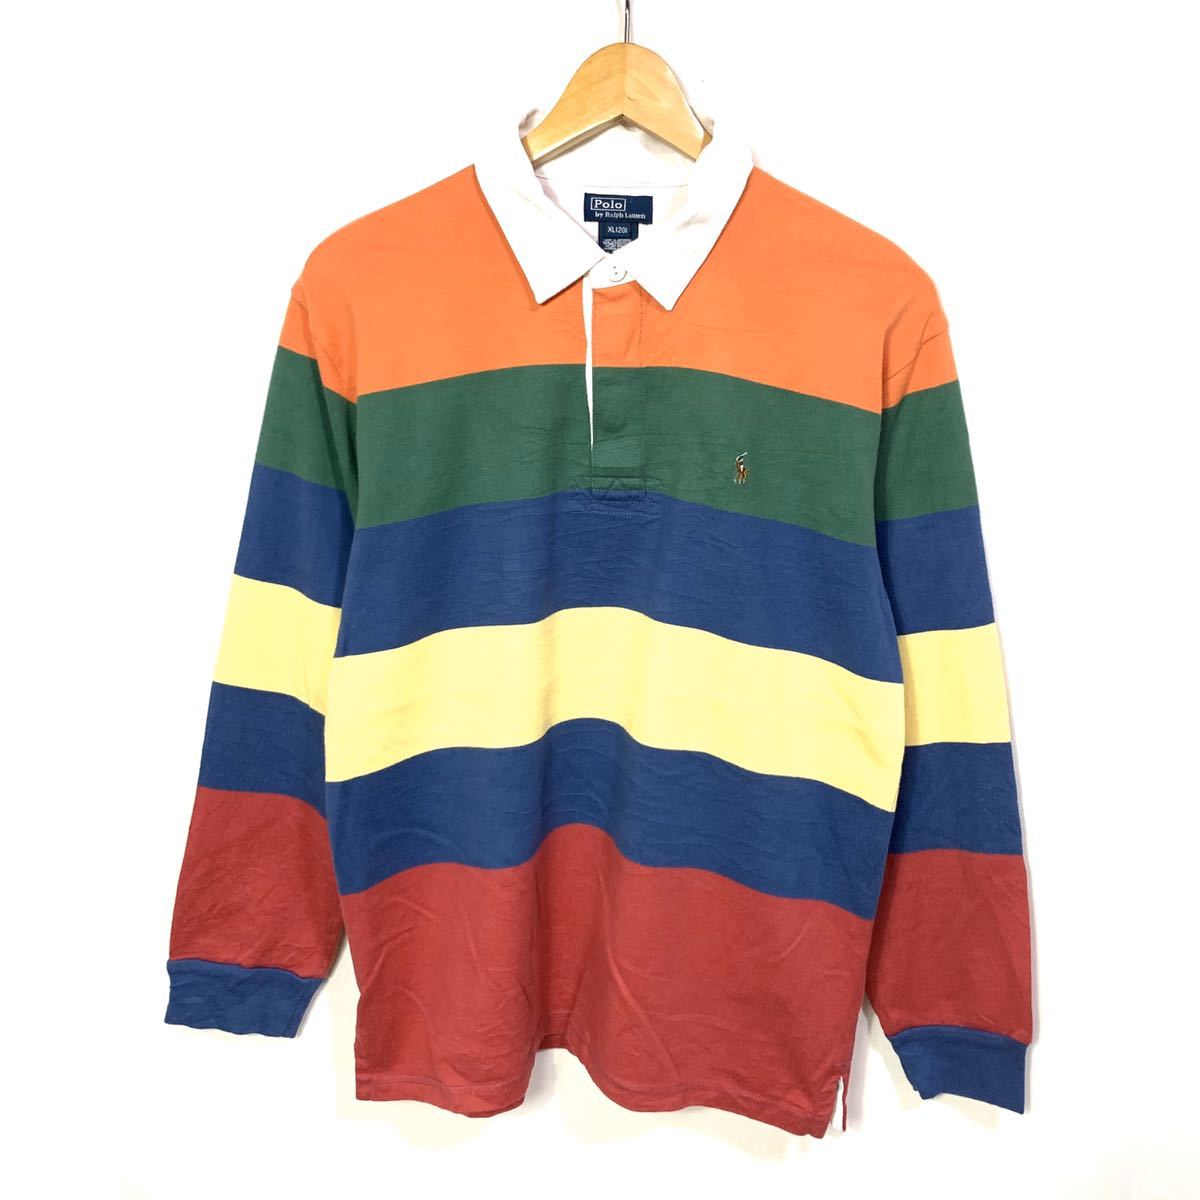 # for children Polo by Ralph Lauren Ralph Lauren futoshi pitch multi border long sleeve Rugger shirt old clothes American Casual polo-shirt size XL#